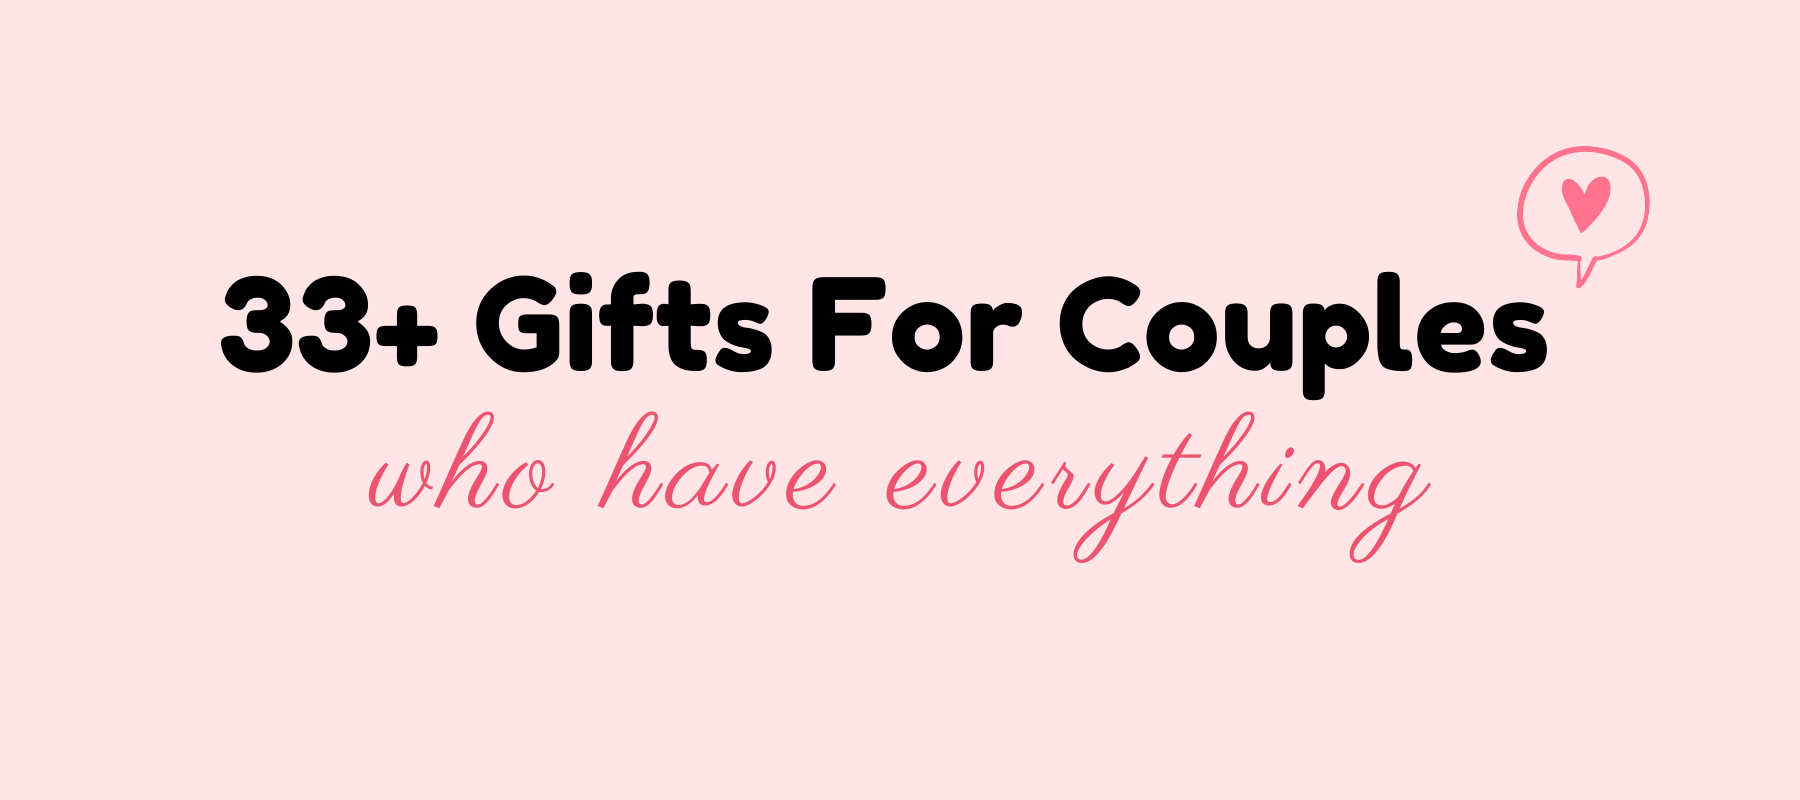 33+ Gifts for Couples Who Have Everything